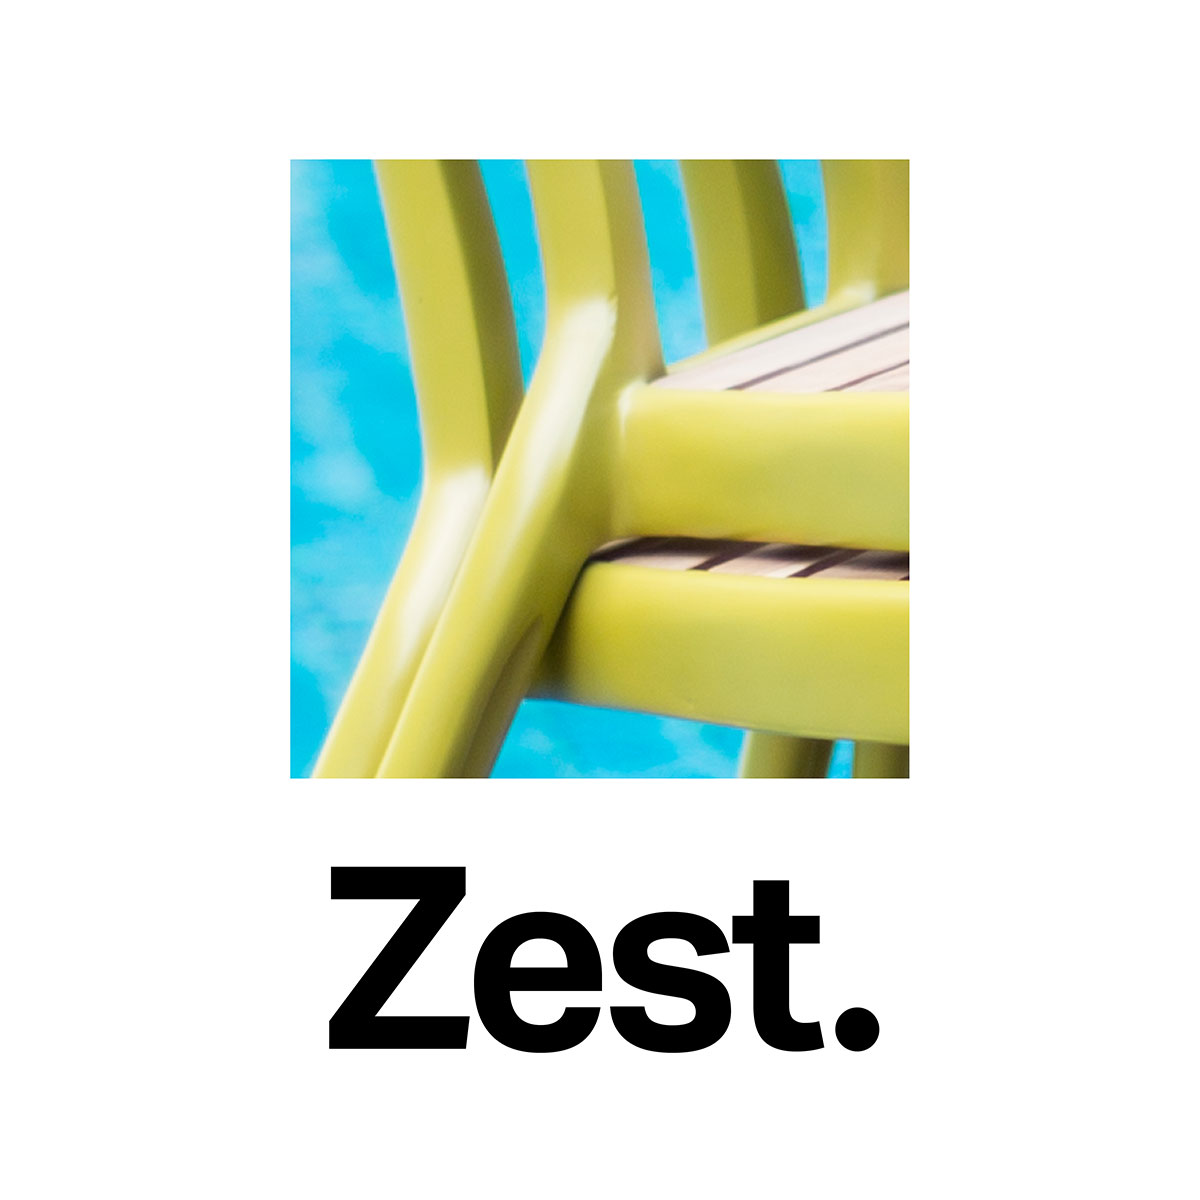 Zest for Life.